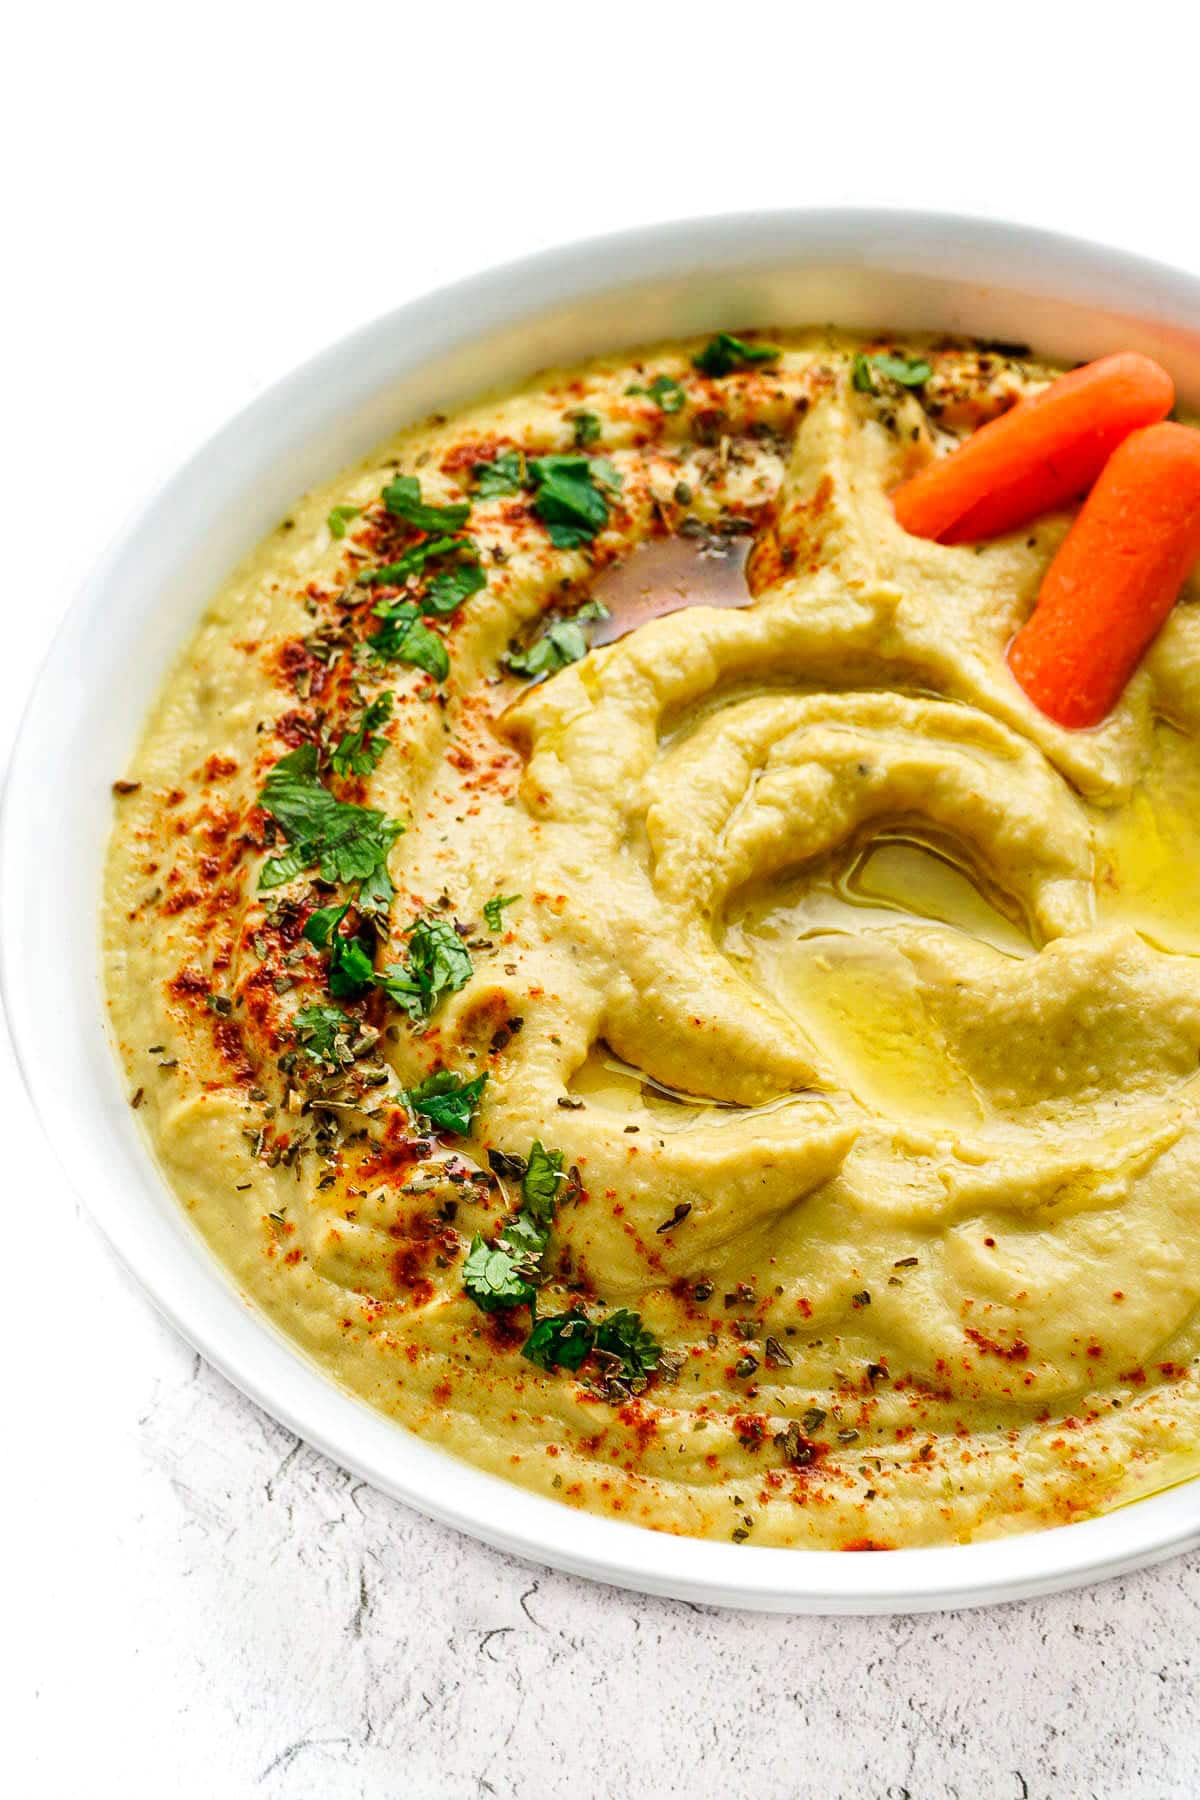 Zucchini Hummus with two baby carrots in the bowl.